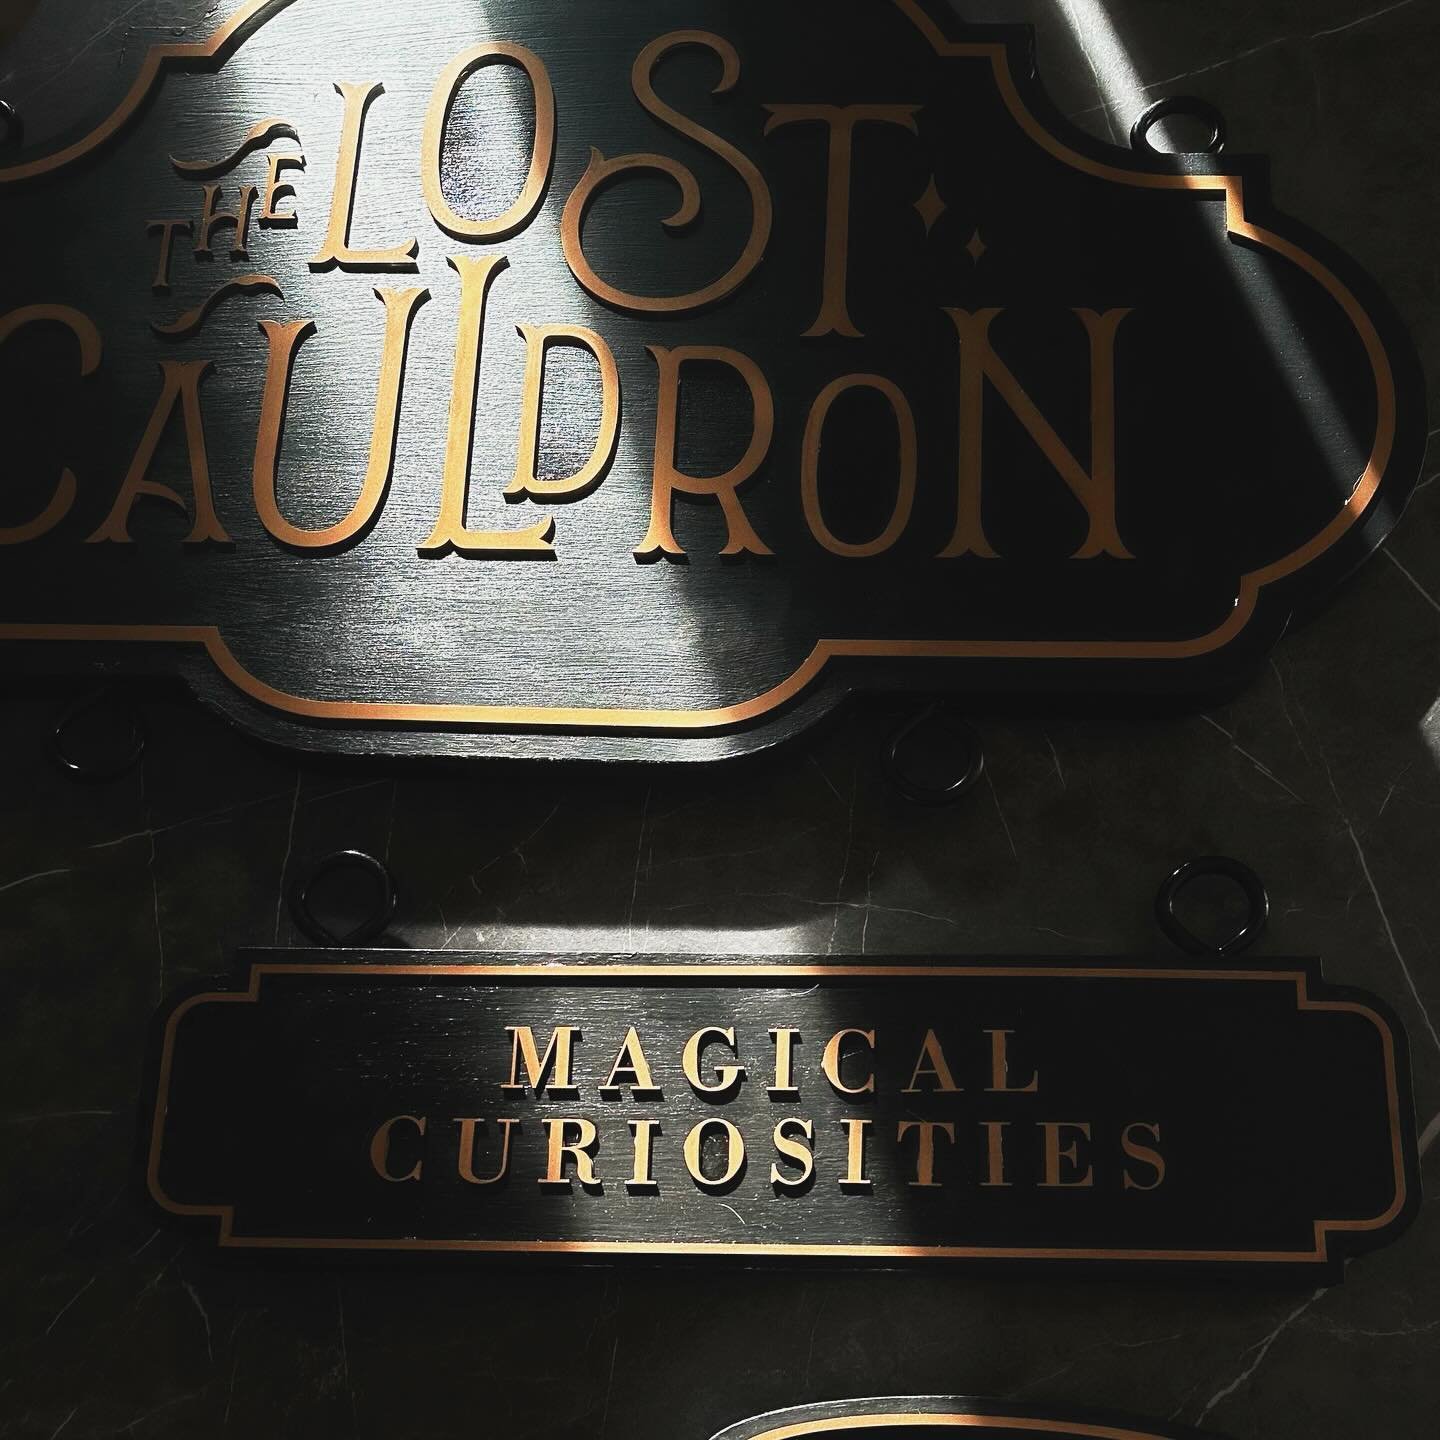 We&rsquo;re spending a lot of time this week on our renovations and our shop sign is almost complete&hellip; it&rsquo;s been handcrafted by @magicalshopkeeper - so it&rsquo;s full of magic! ✨ #TheLostCauldron